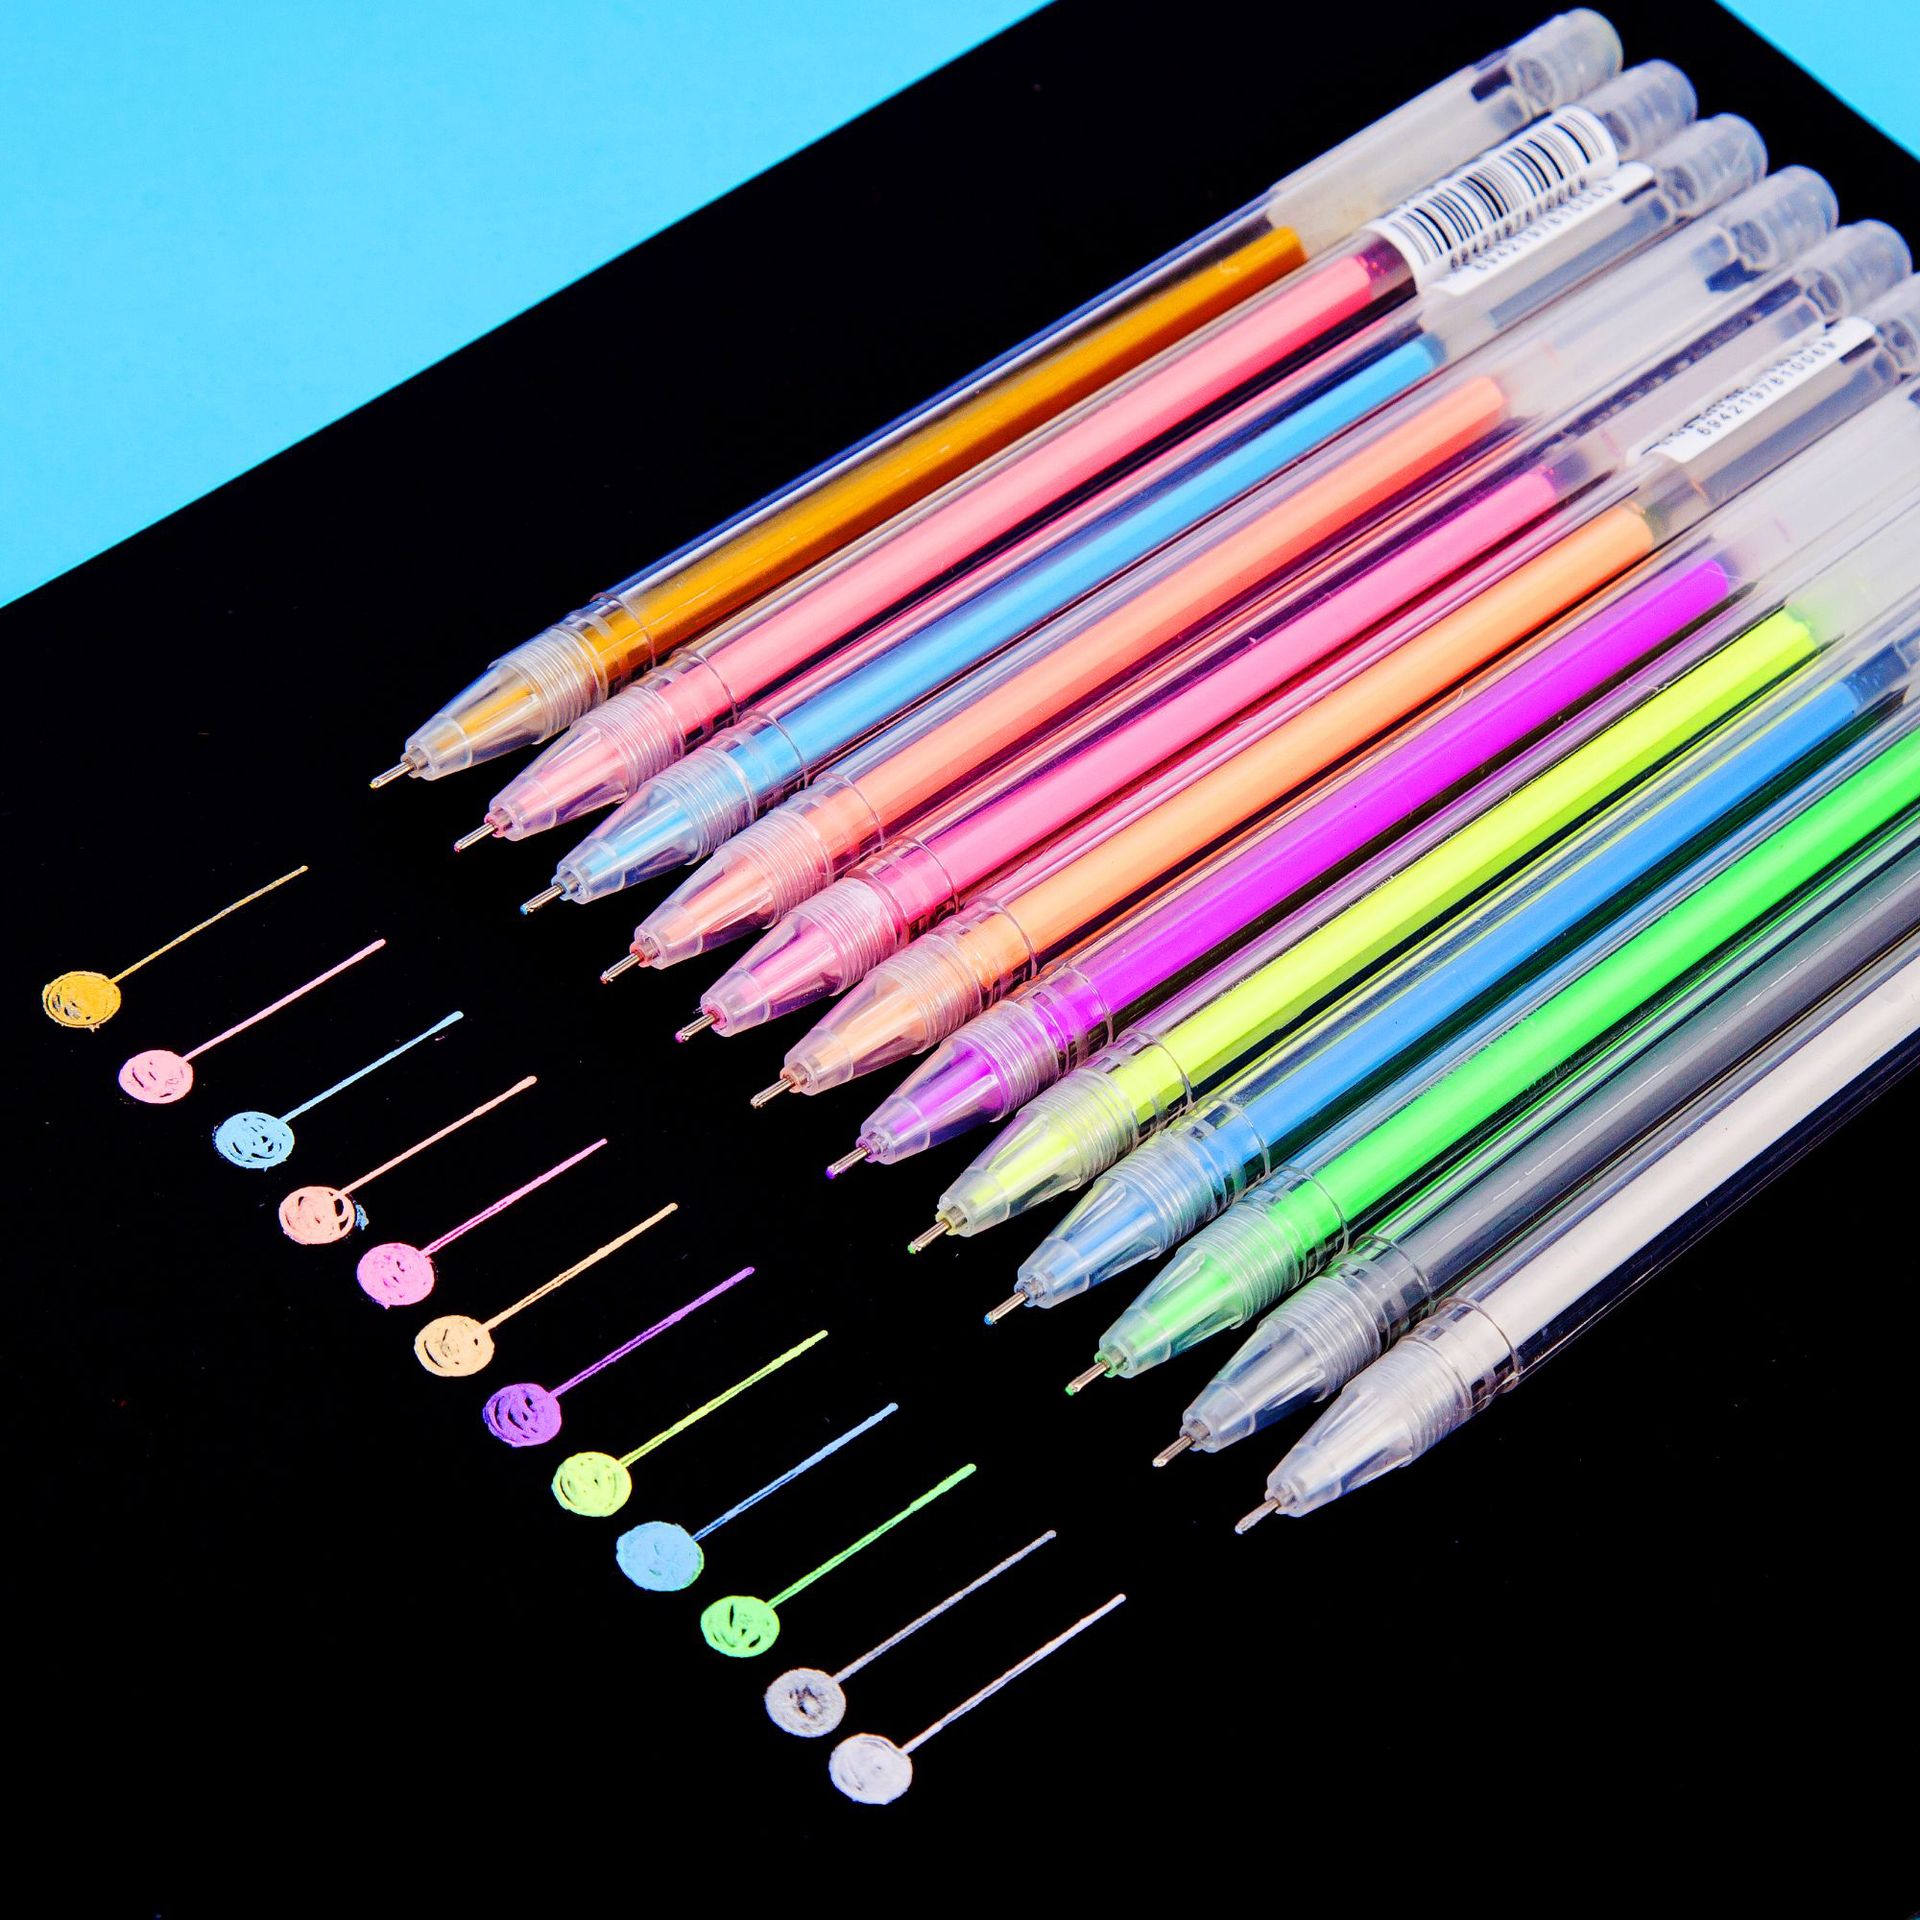 1pcs Sipa Ball Pin Drawing Pen Pigment Liner Set Black ink 0.05mm to 0.8mm  New